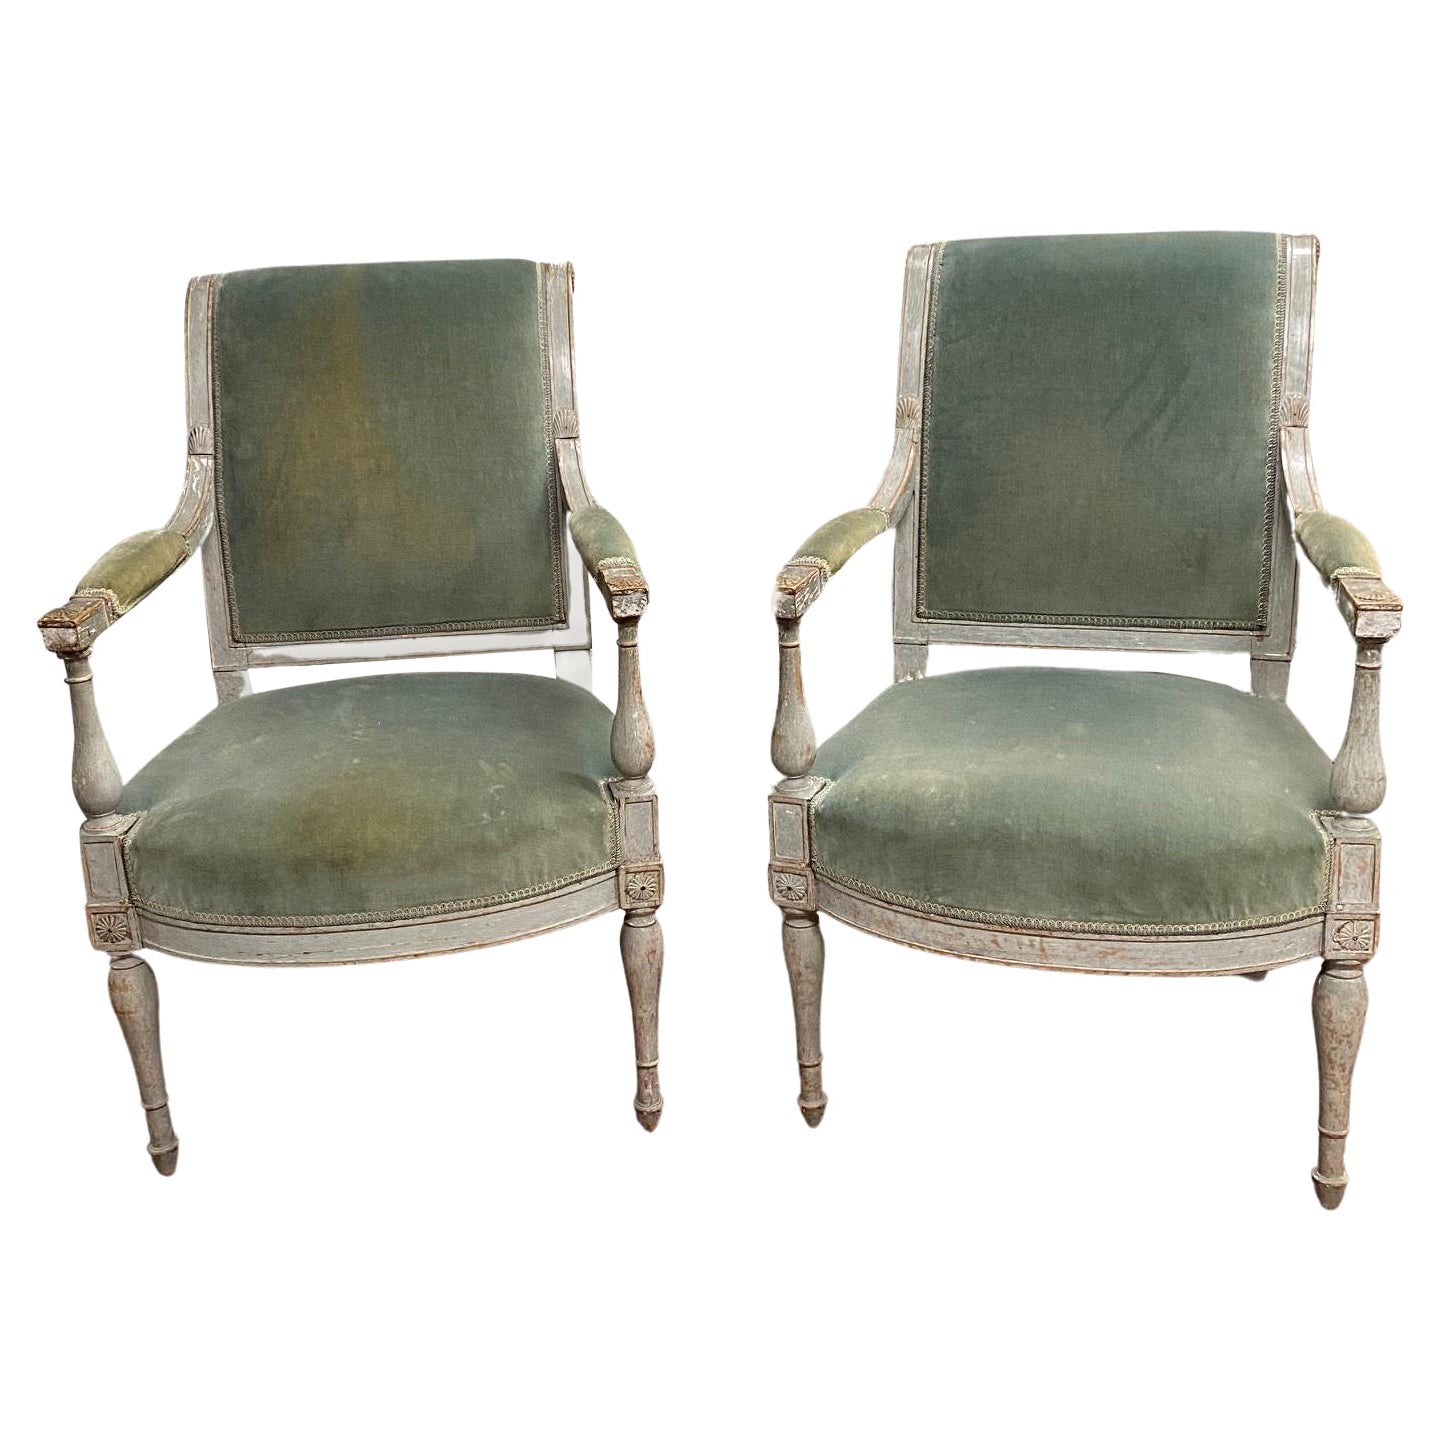 Pair of Directoire Period Painted Armchairs after a Model by Jacob Desmalter For Sale